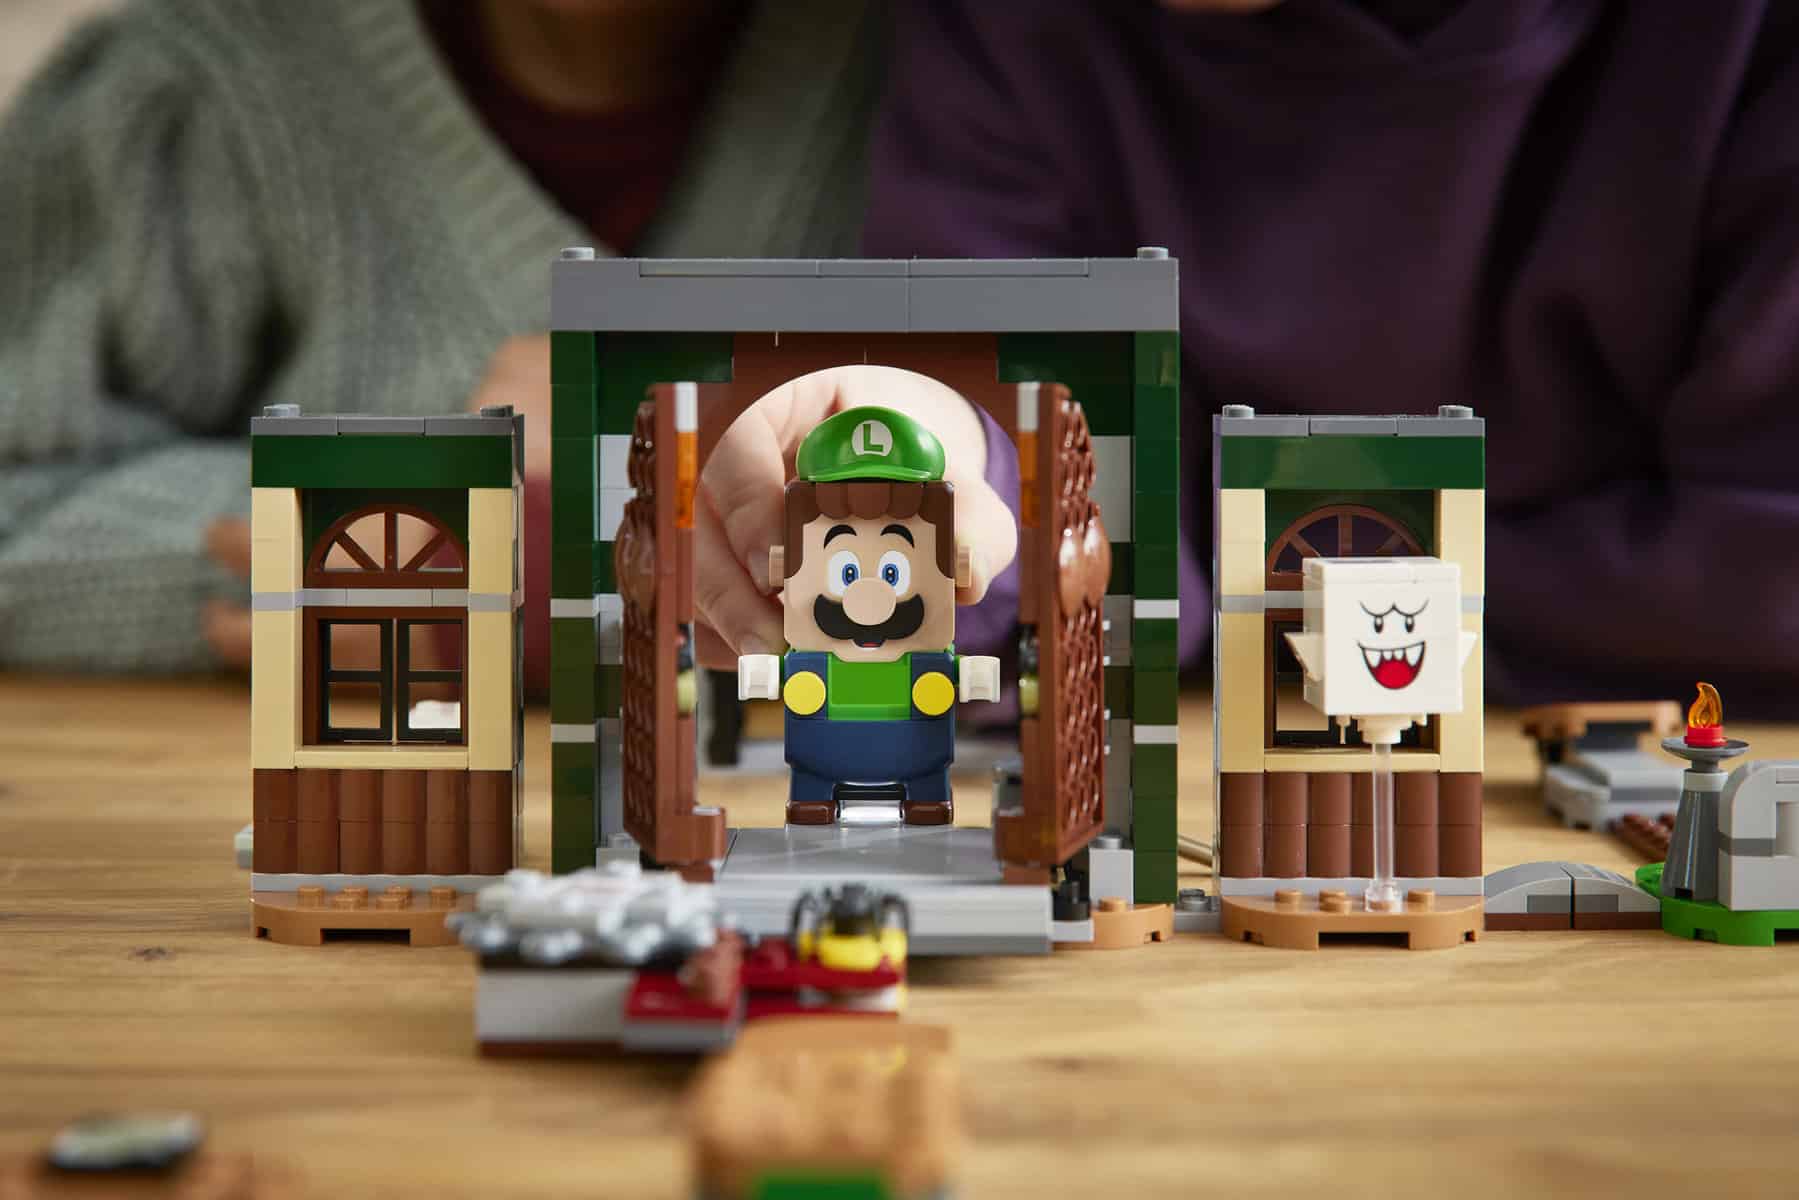 Lego Luigi’s Mansion themed sets are coming in early 2022